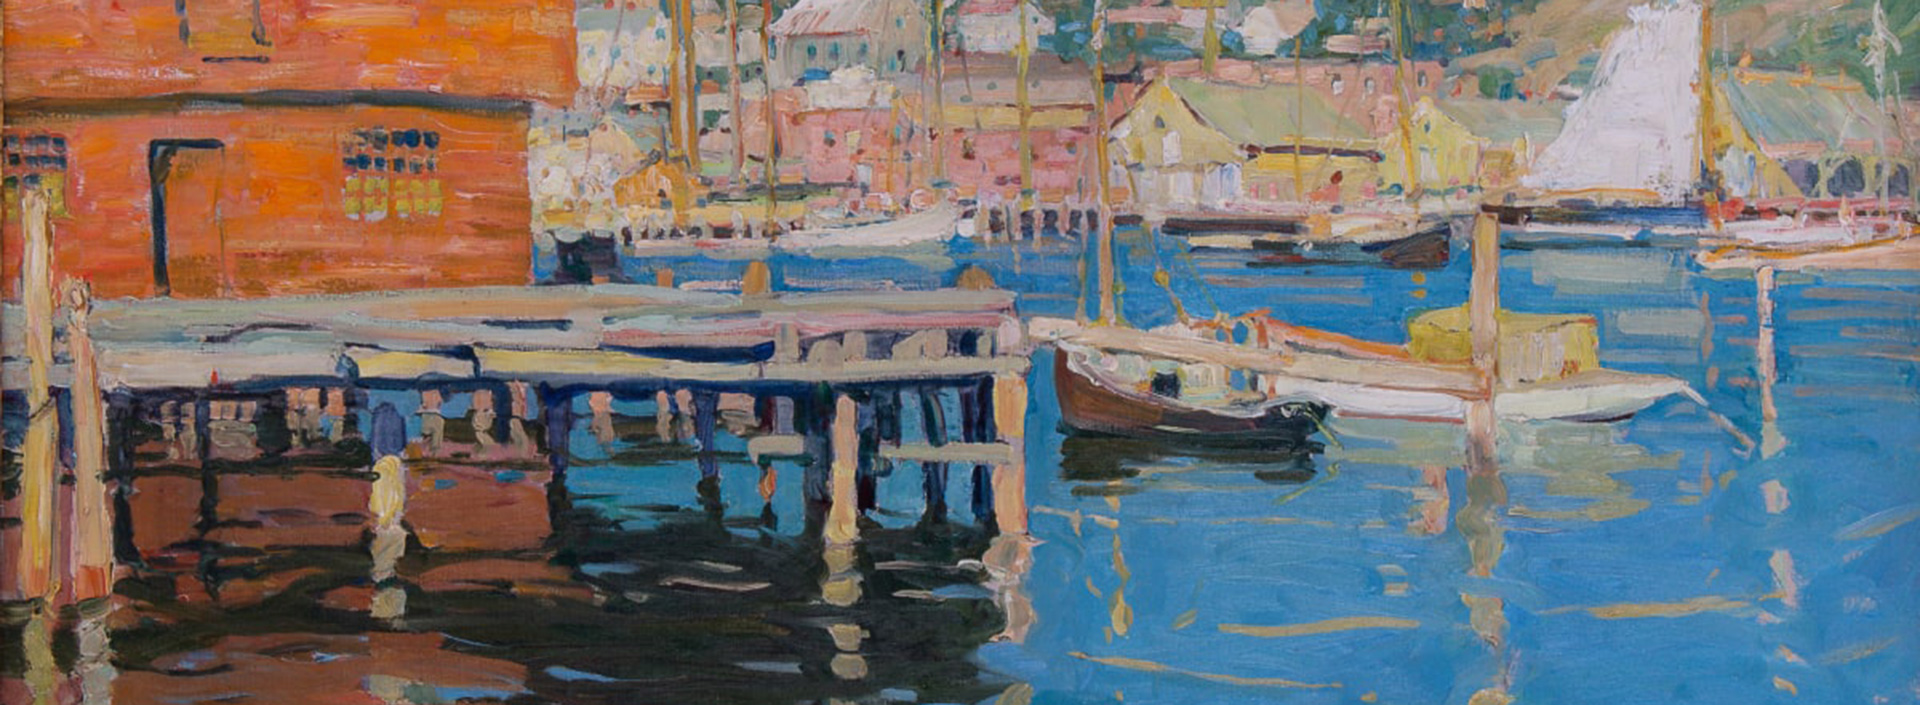 Painting of a harbor.